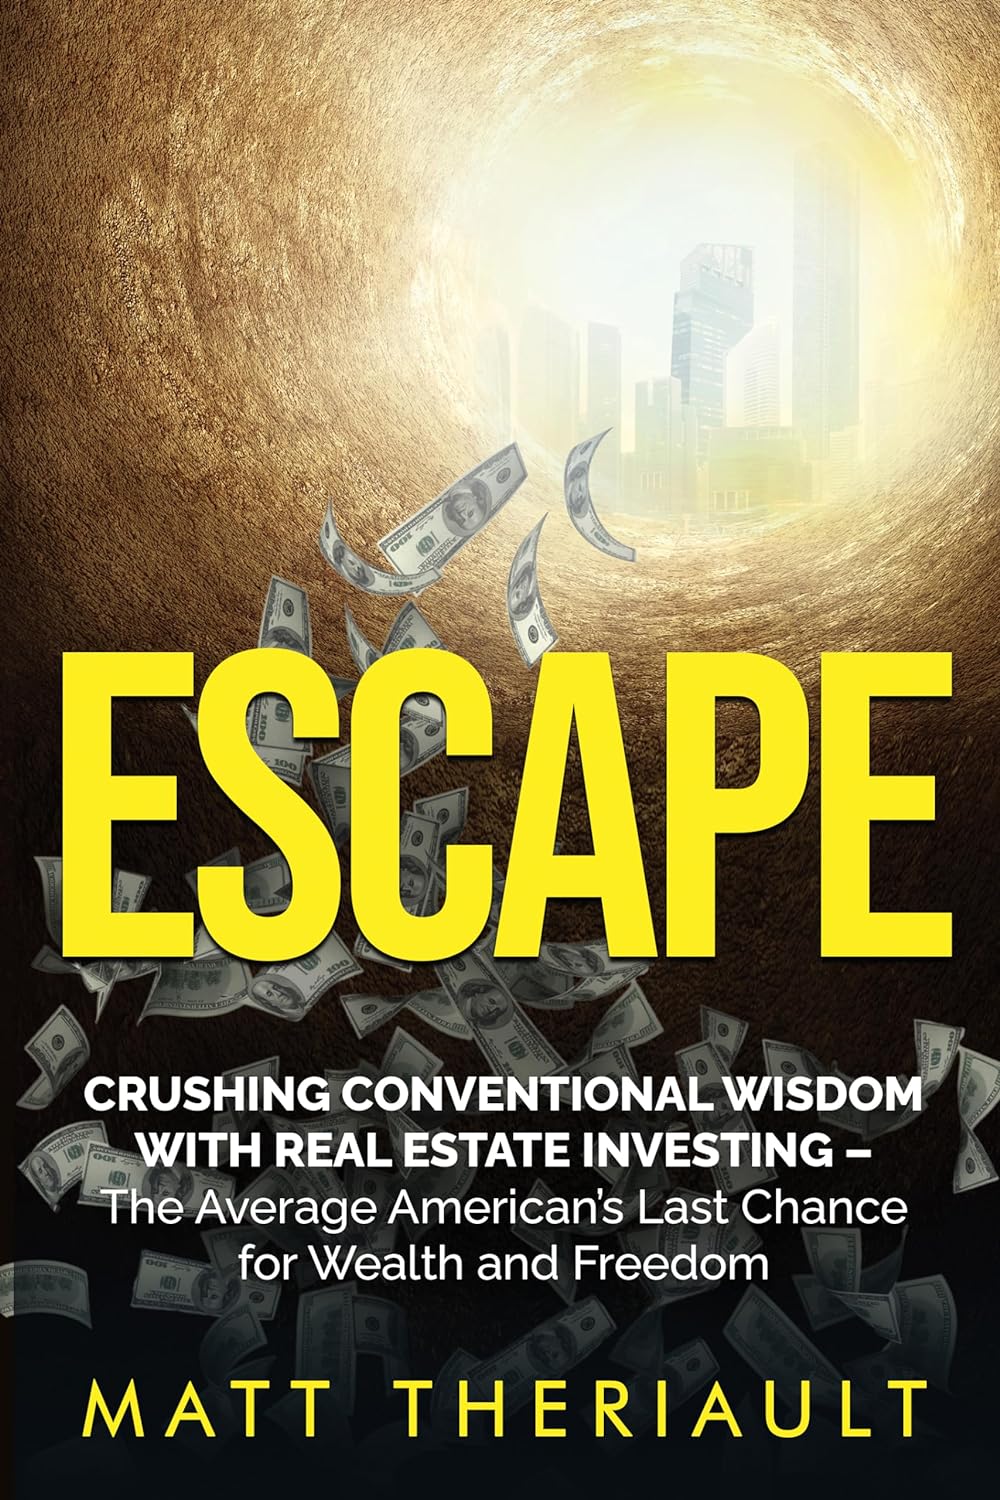 Escape: Crushing Conventional Wisdom With Real Estate Investing